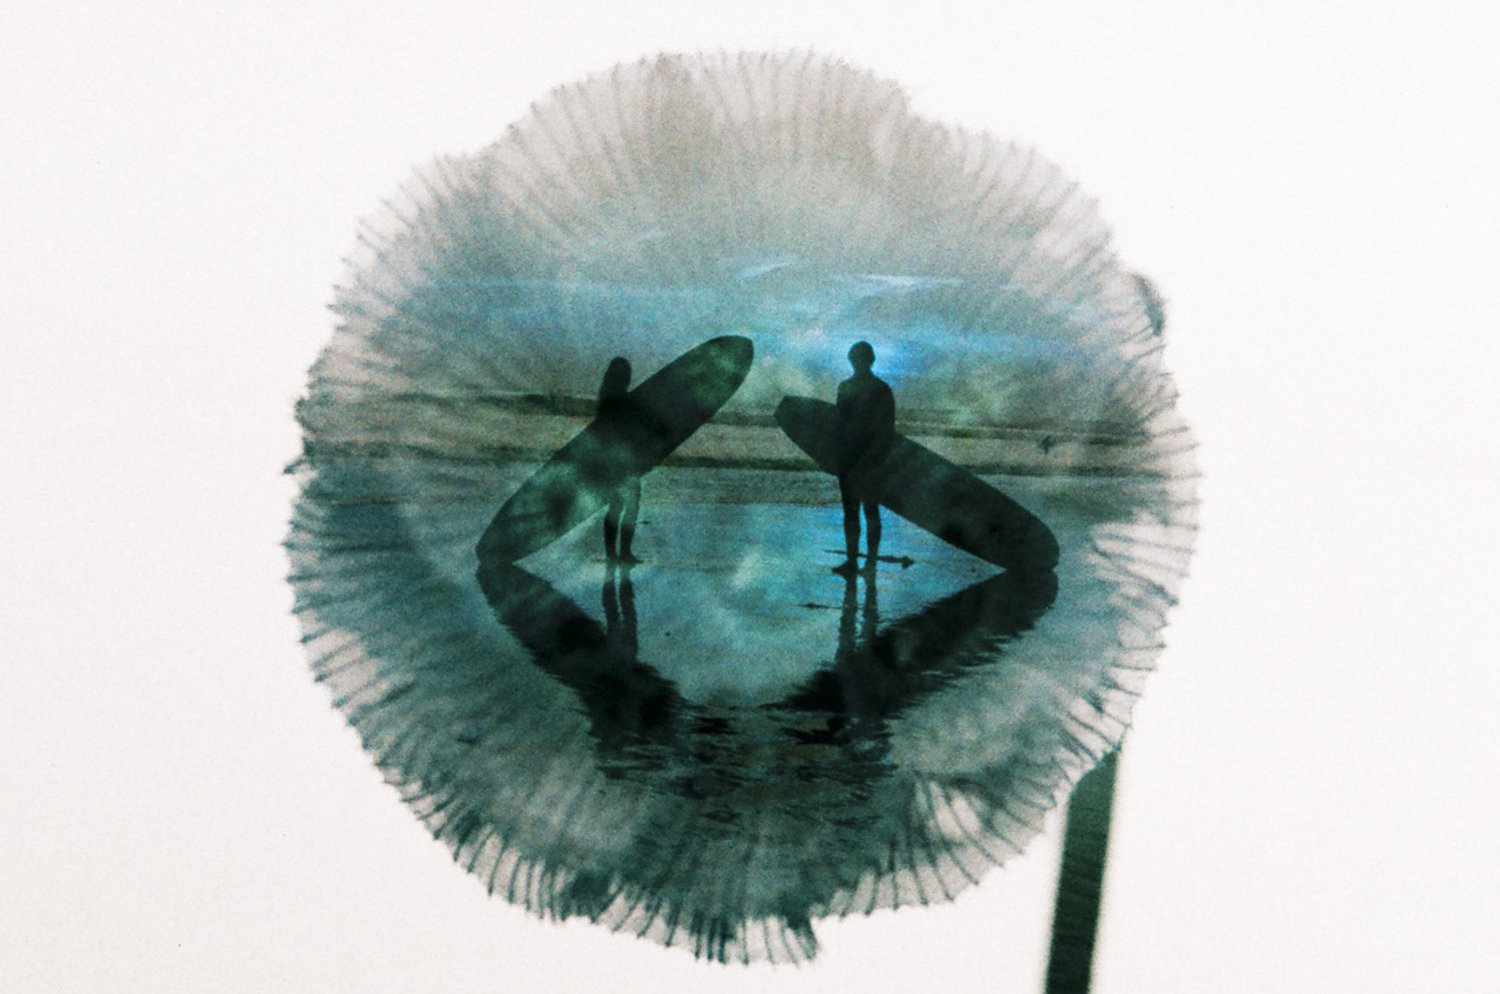 JJ and Natalie Wessels double-exposed in a Starflower on Lomochrome Turquoise film